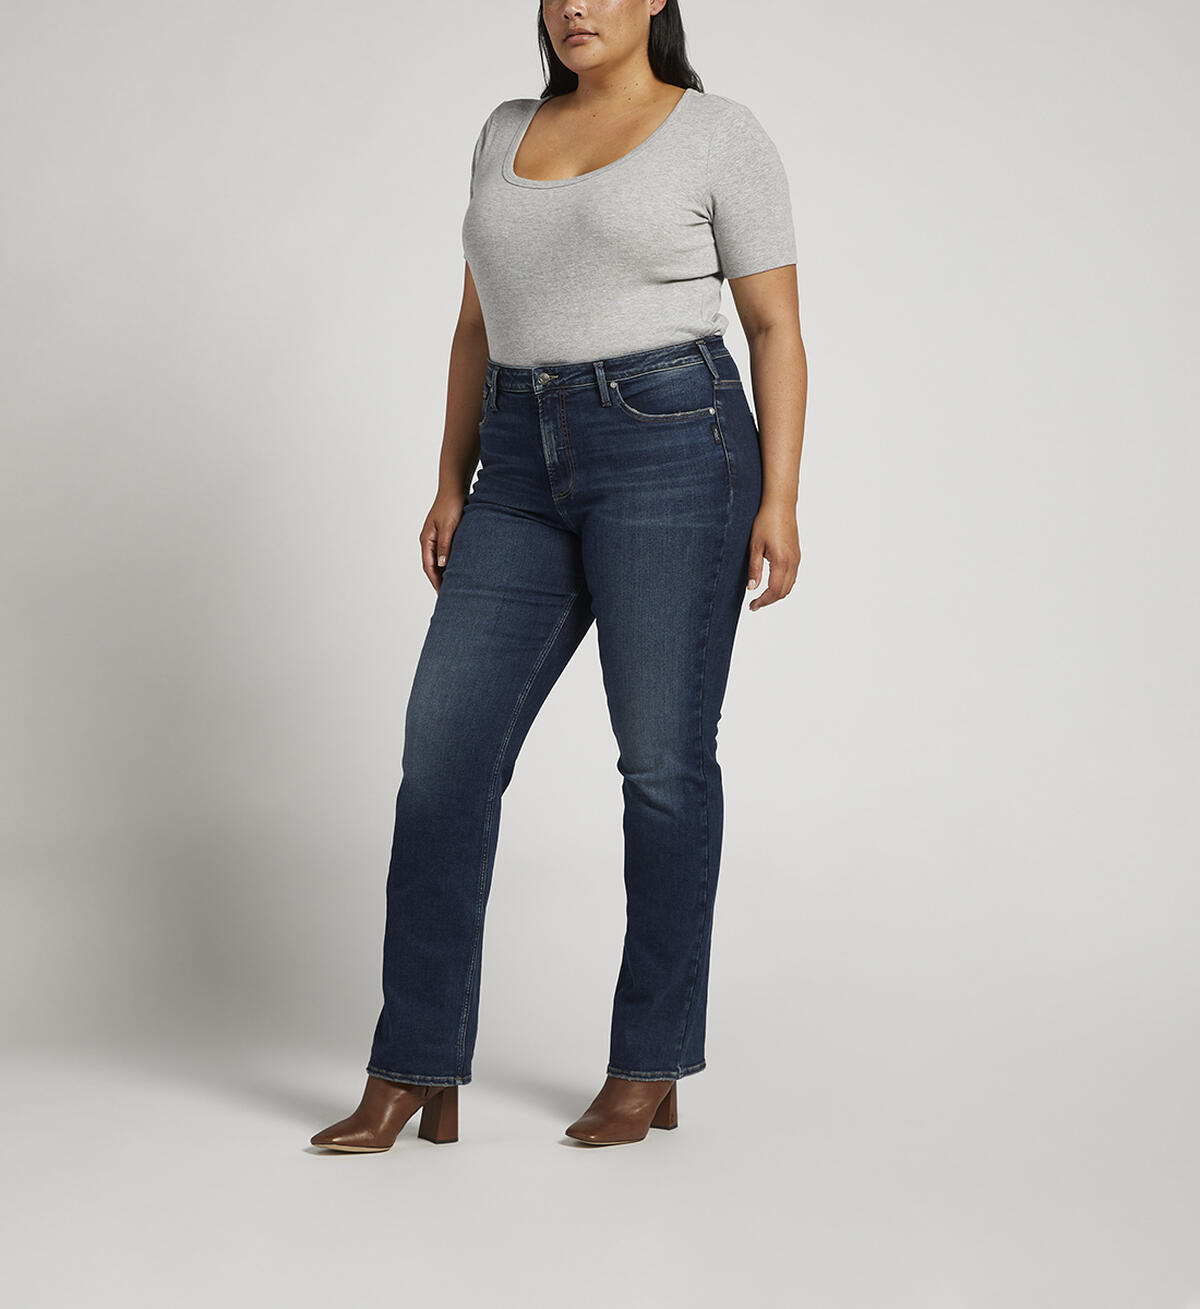 Infinite Fit High Rise Bootcut Jeans Plus Size, , hi-res image number 2